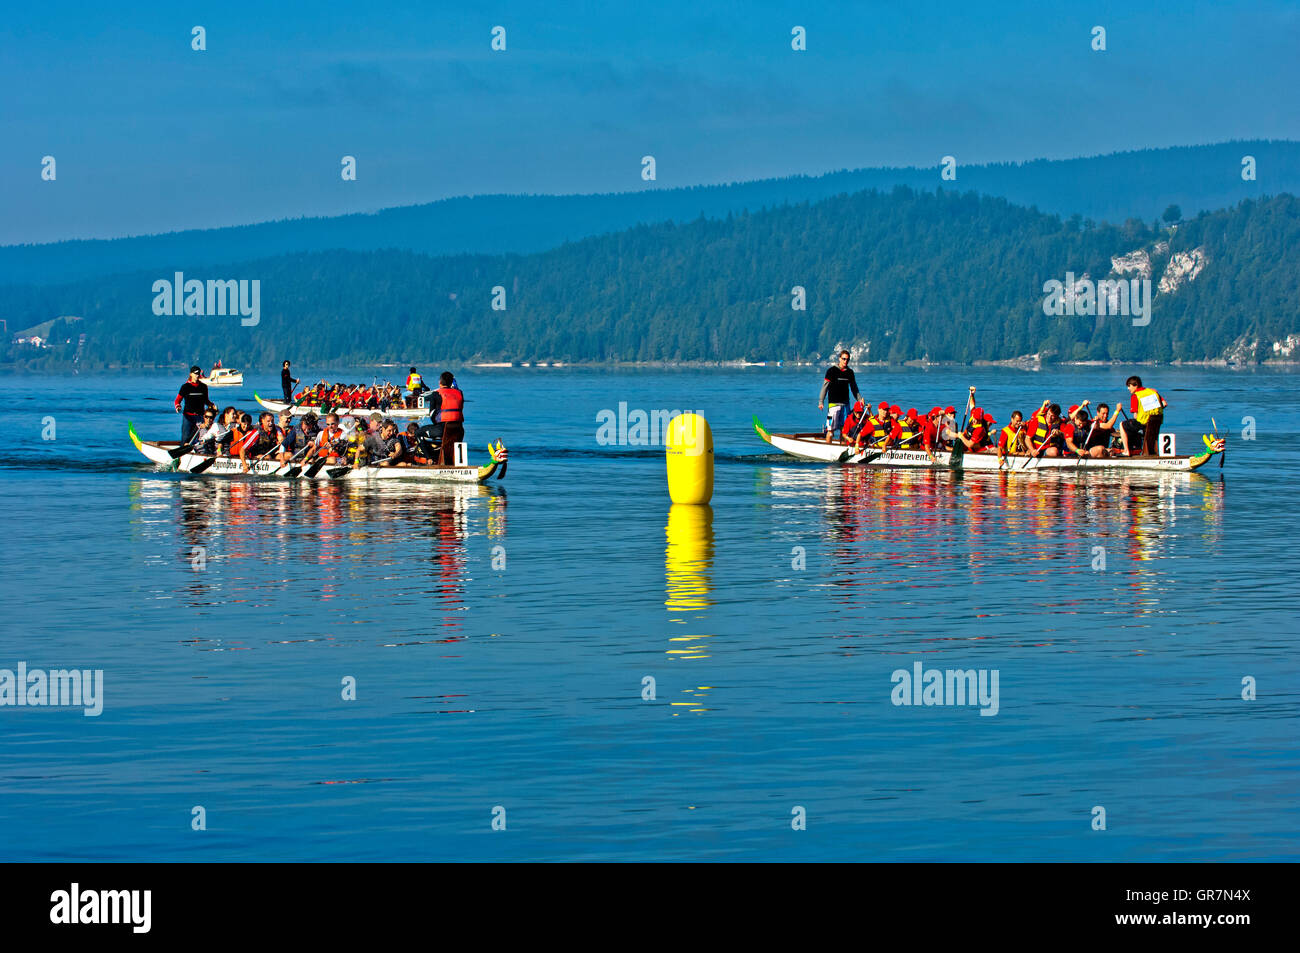 Dragon Boat At The Finishing Line Of A Boat Race On Lake Lac De Joux, Vaud, Switzerland Stock Photo